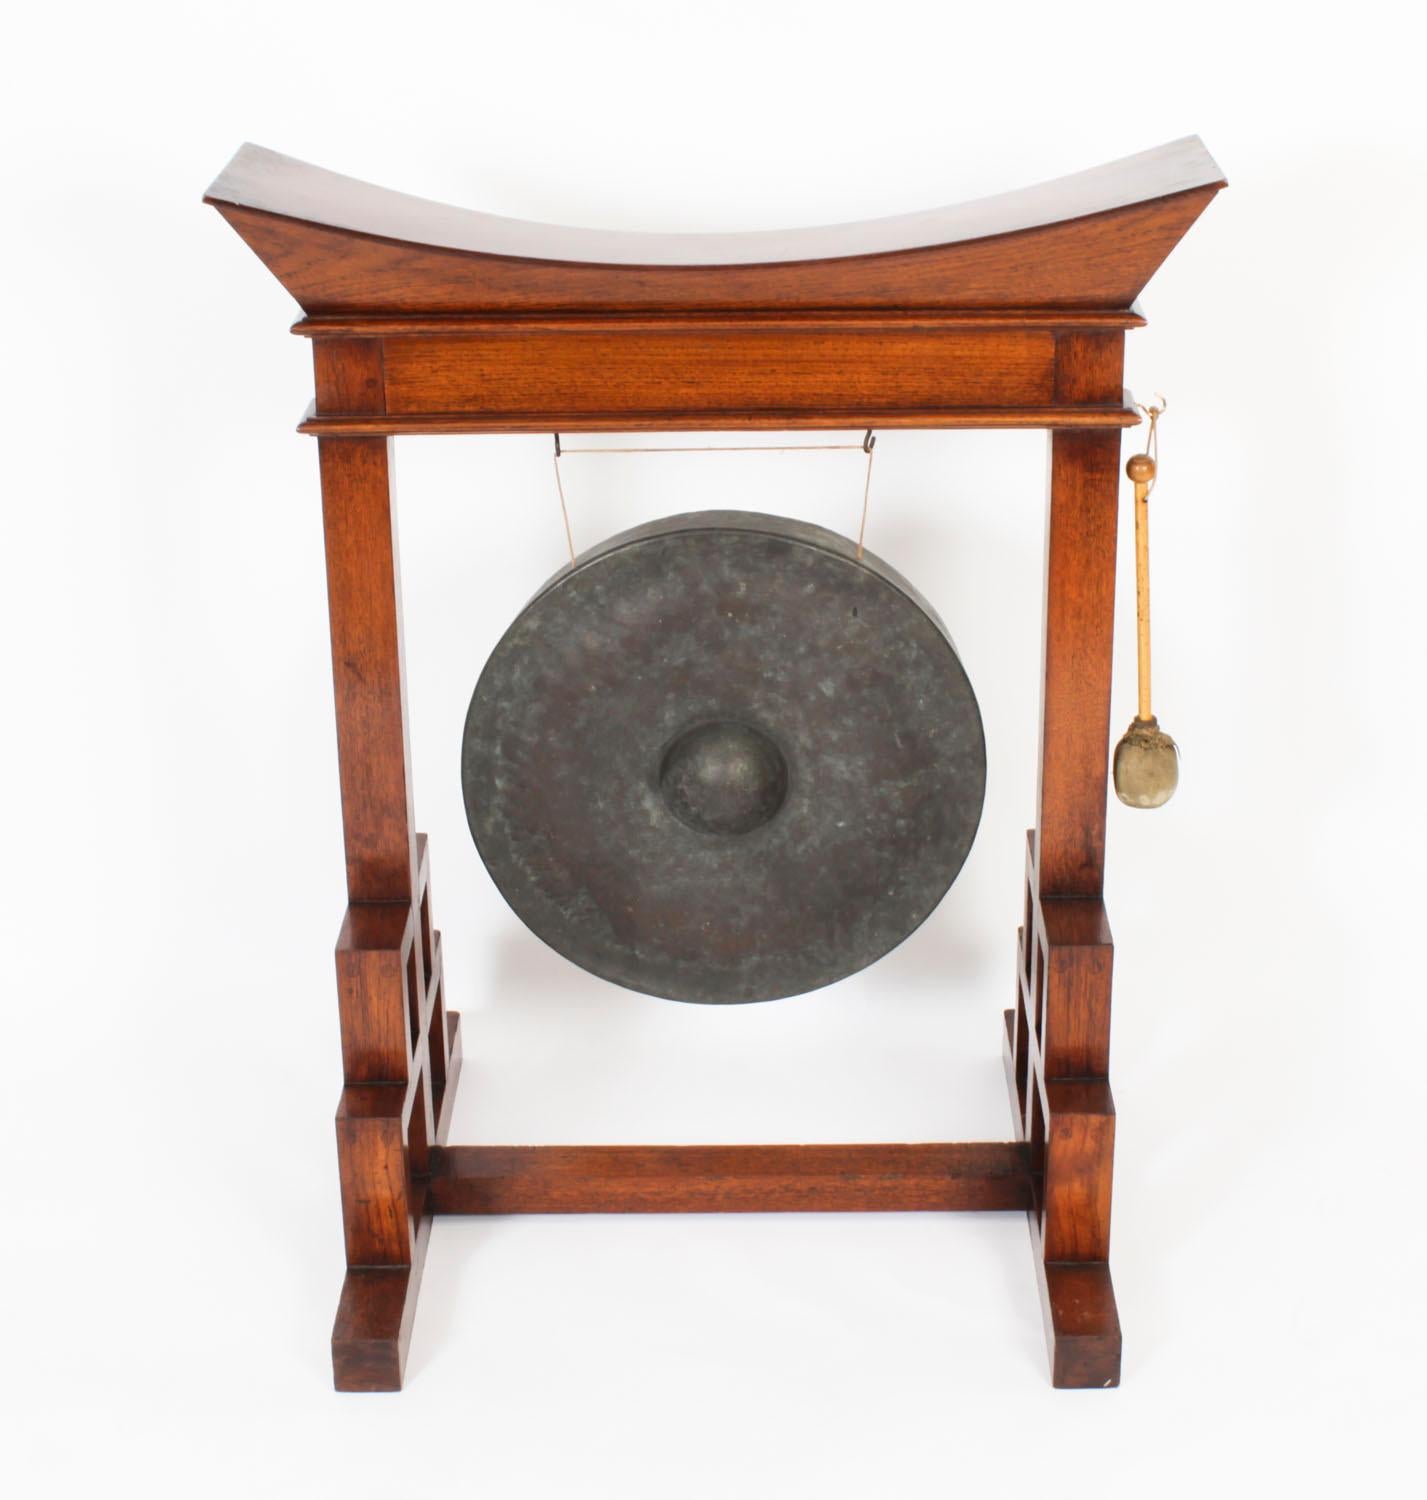 A superb quality Aesthetic Movement Anglo-Japanese dinner gong in the manner of Edward William Godwin,  Circa 1880 in date.

This fabulous gong is extremely well made with careful attention to detail, all the joints are pegged, and a very resonant